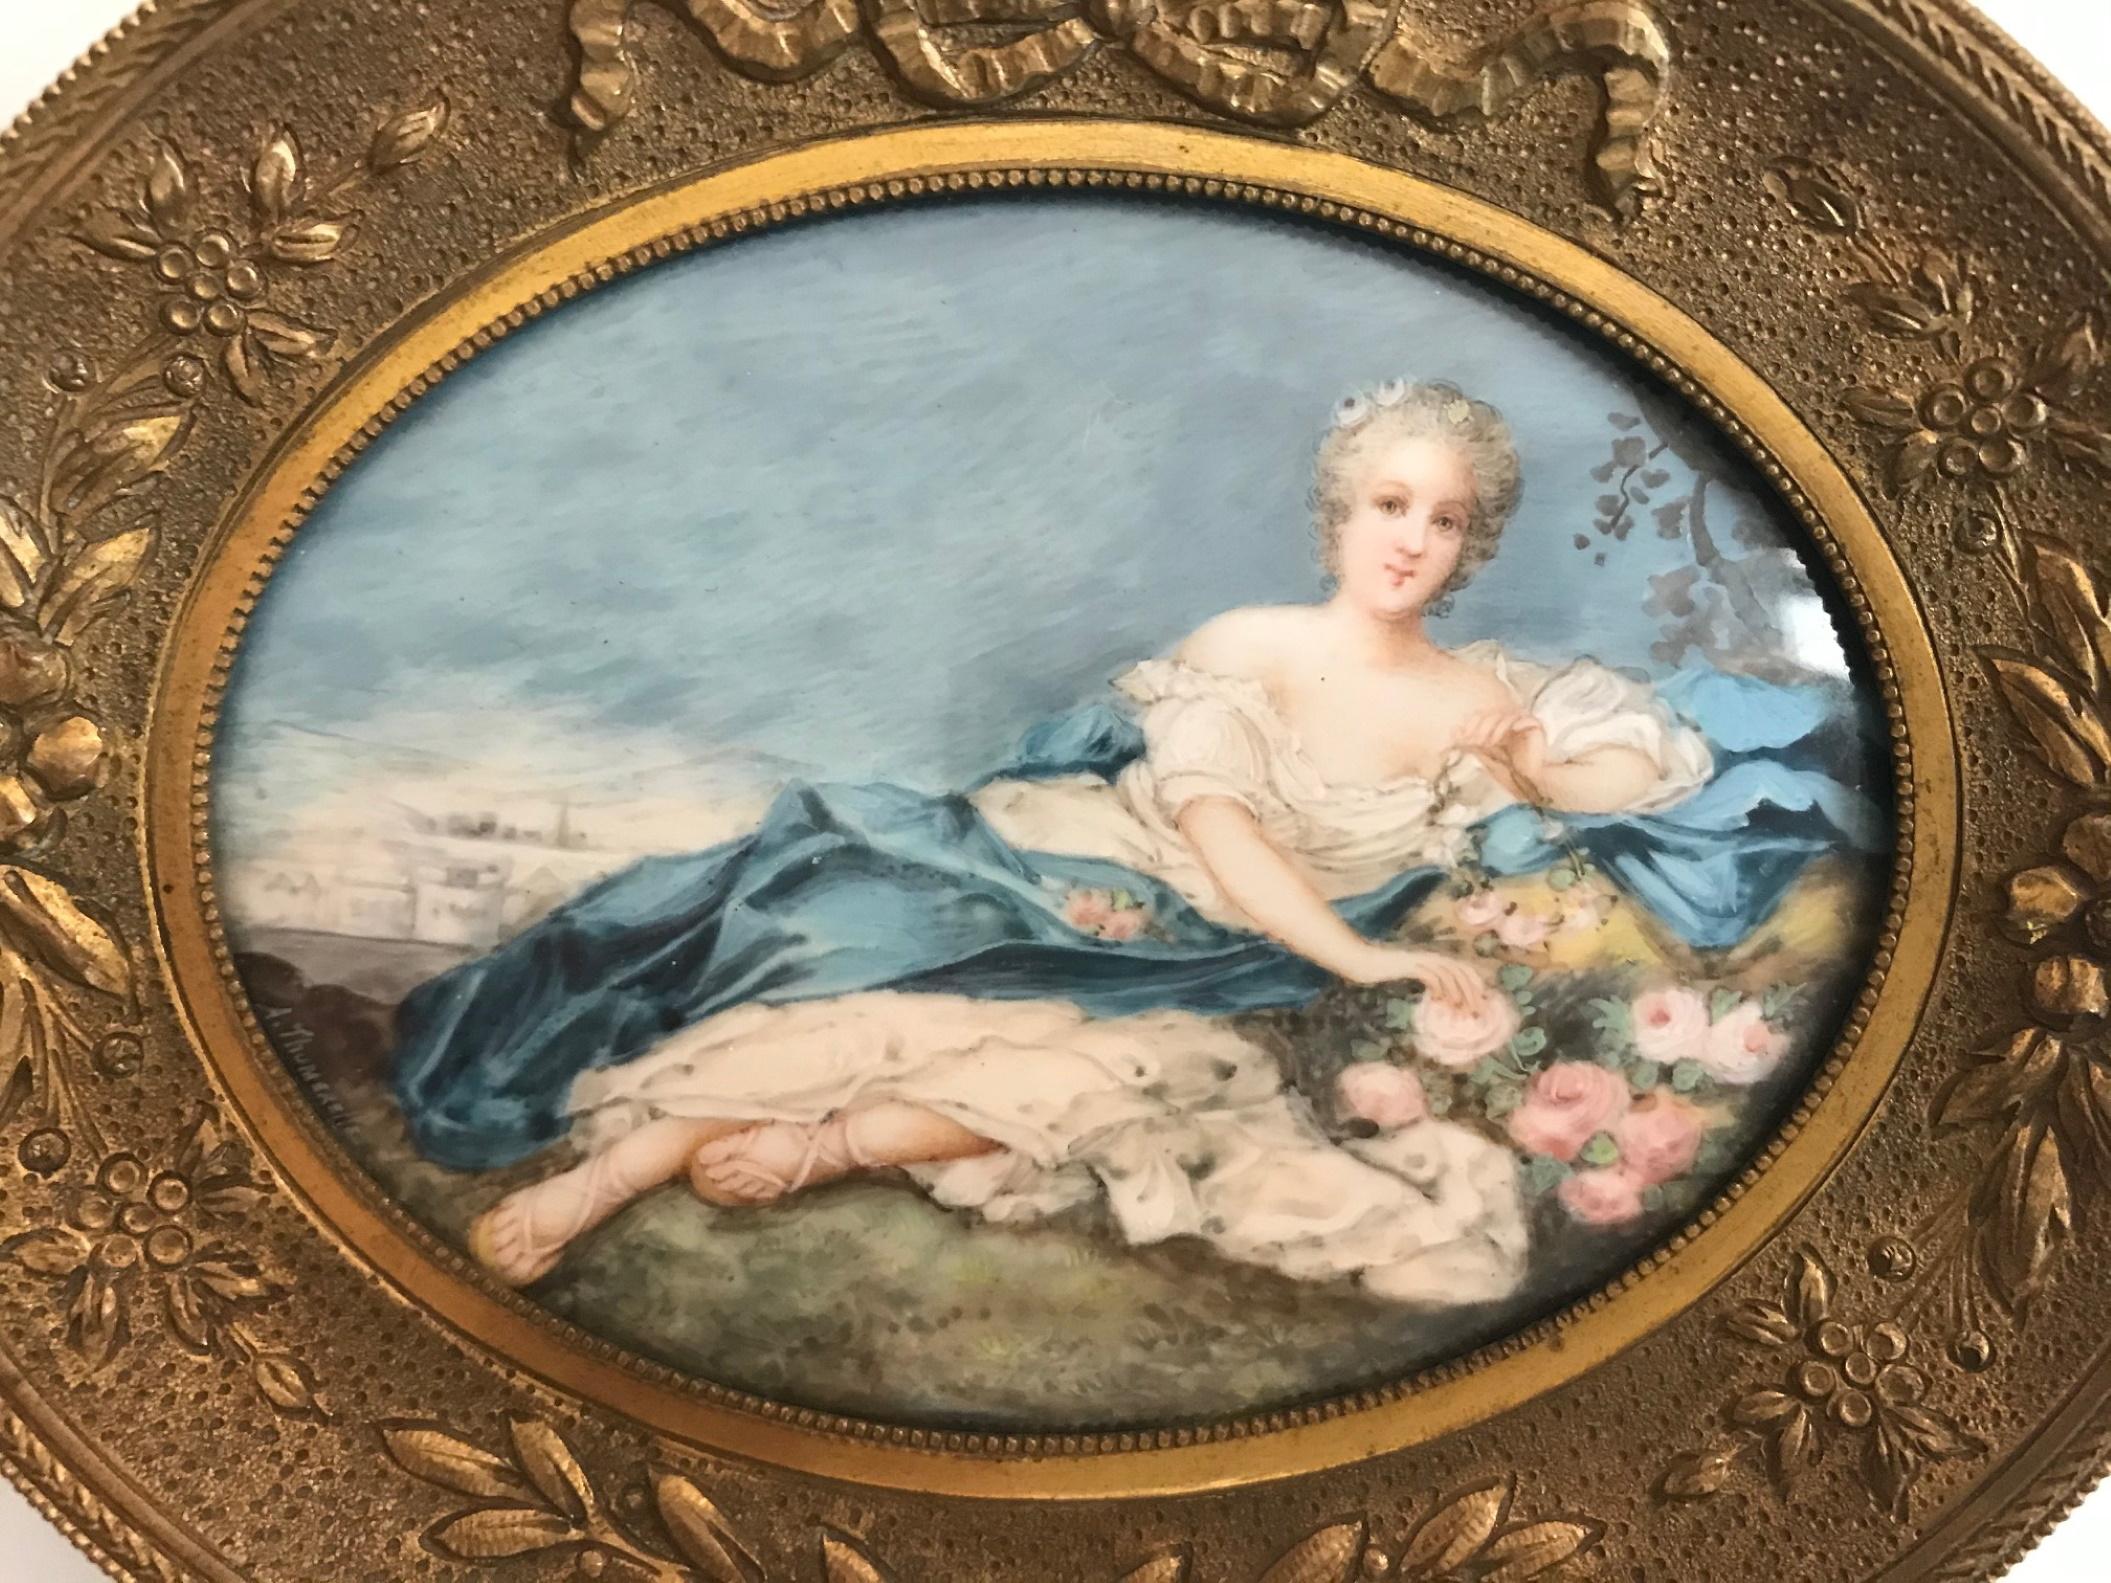 18th century French miniature genre painting in ormolu frame.

This beautifully executed oval miniature Boucher style painting depicts a young lady reclining on a flower bed. This exceptional French 18th century period miniature is incredibly